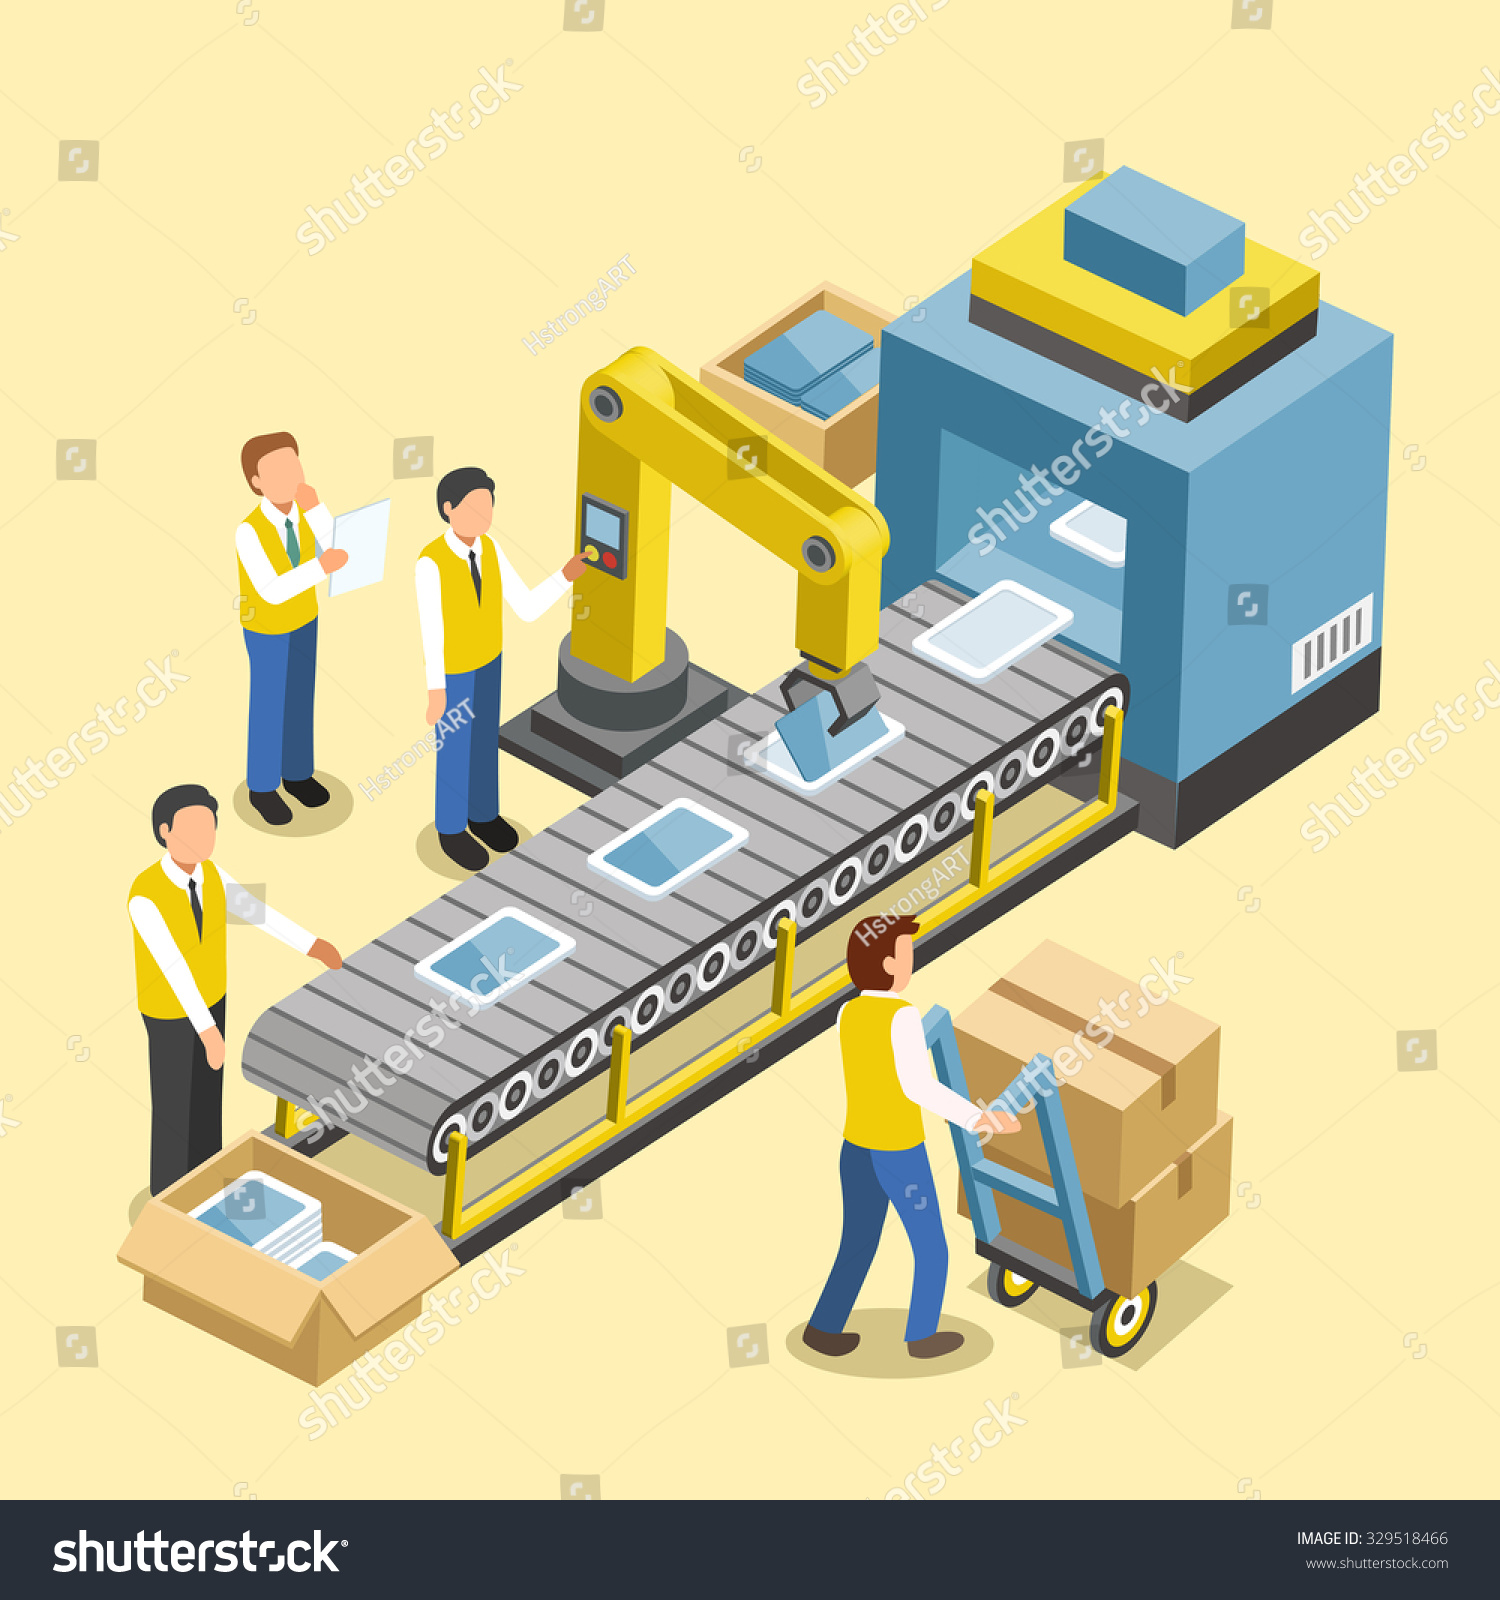 clip art of assembly line worker - photo #18